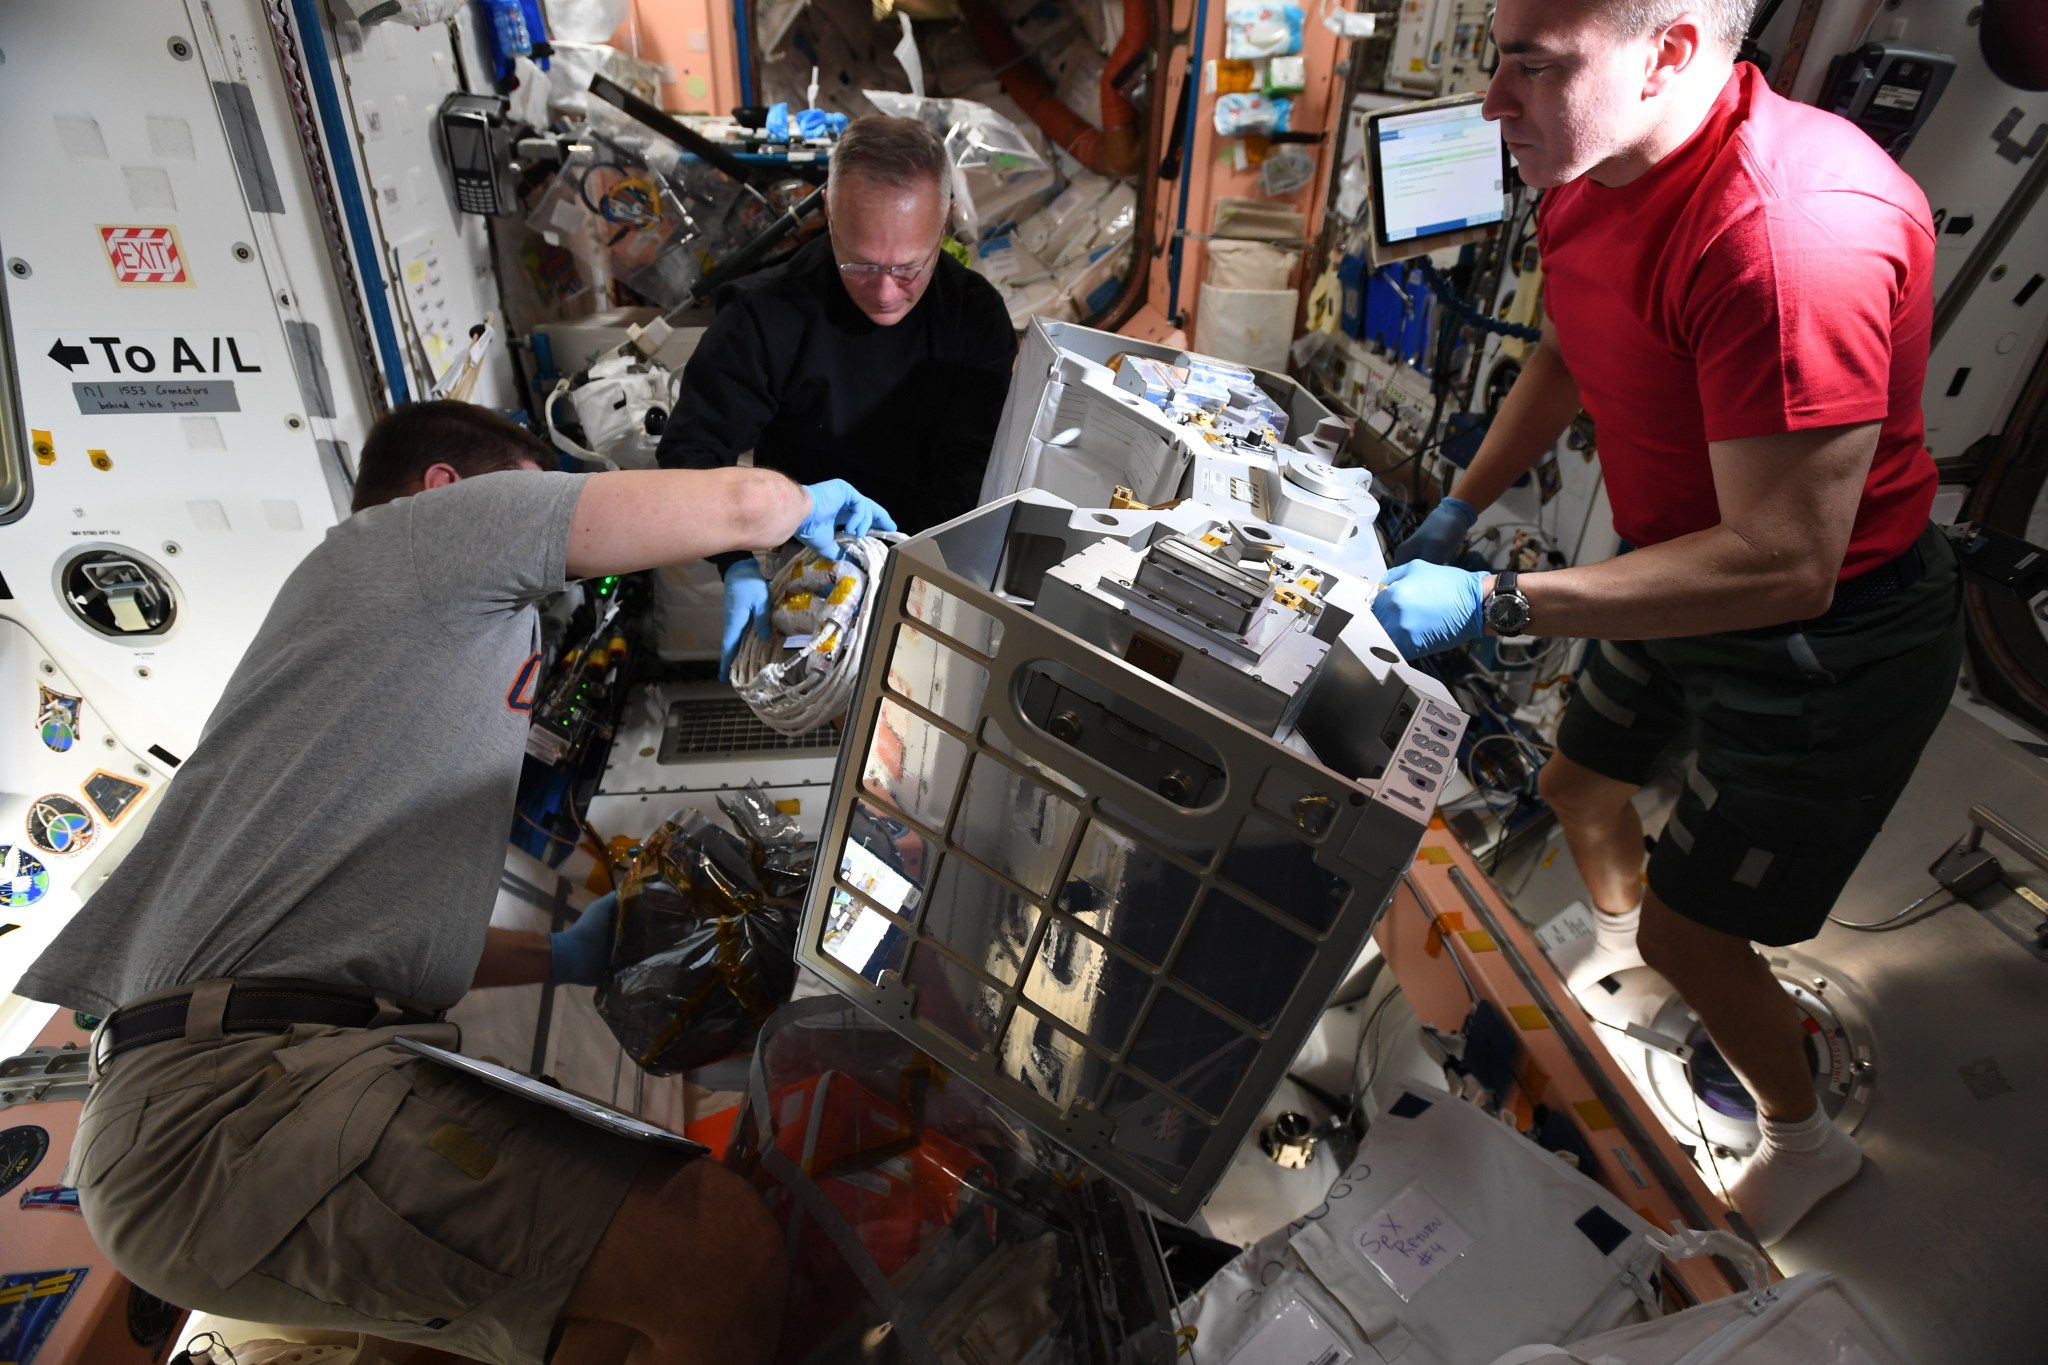 Astronauts Robert Behnken, Doug Hurley, and Chris Cassidy aboard ISS, working on a gray piece of technology together.